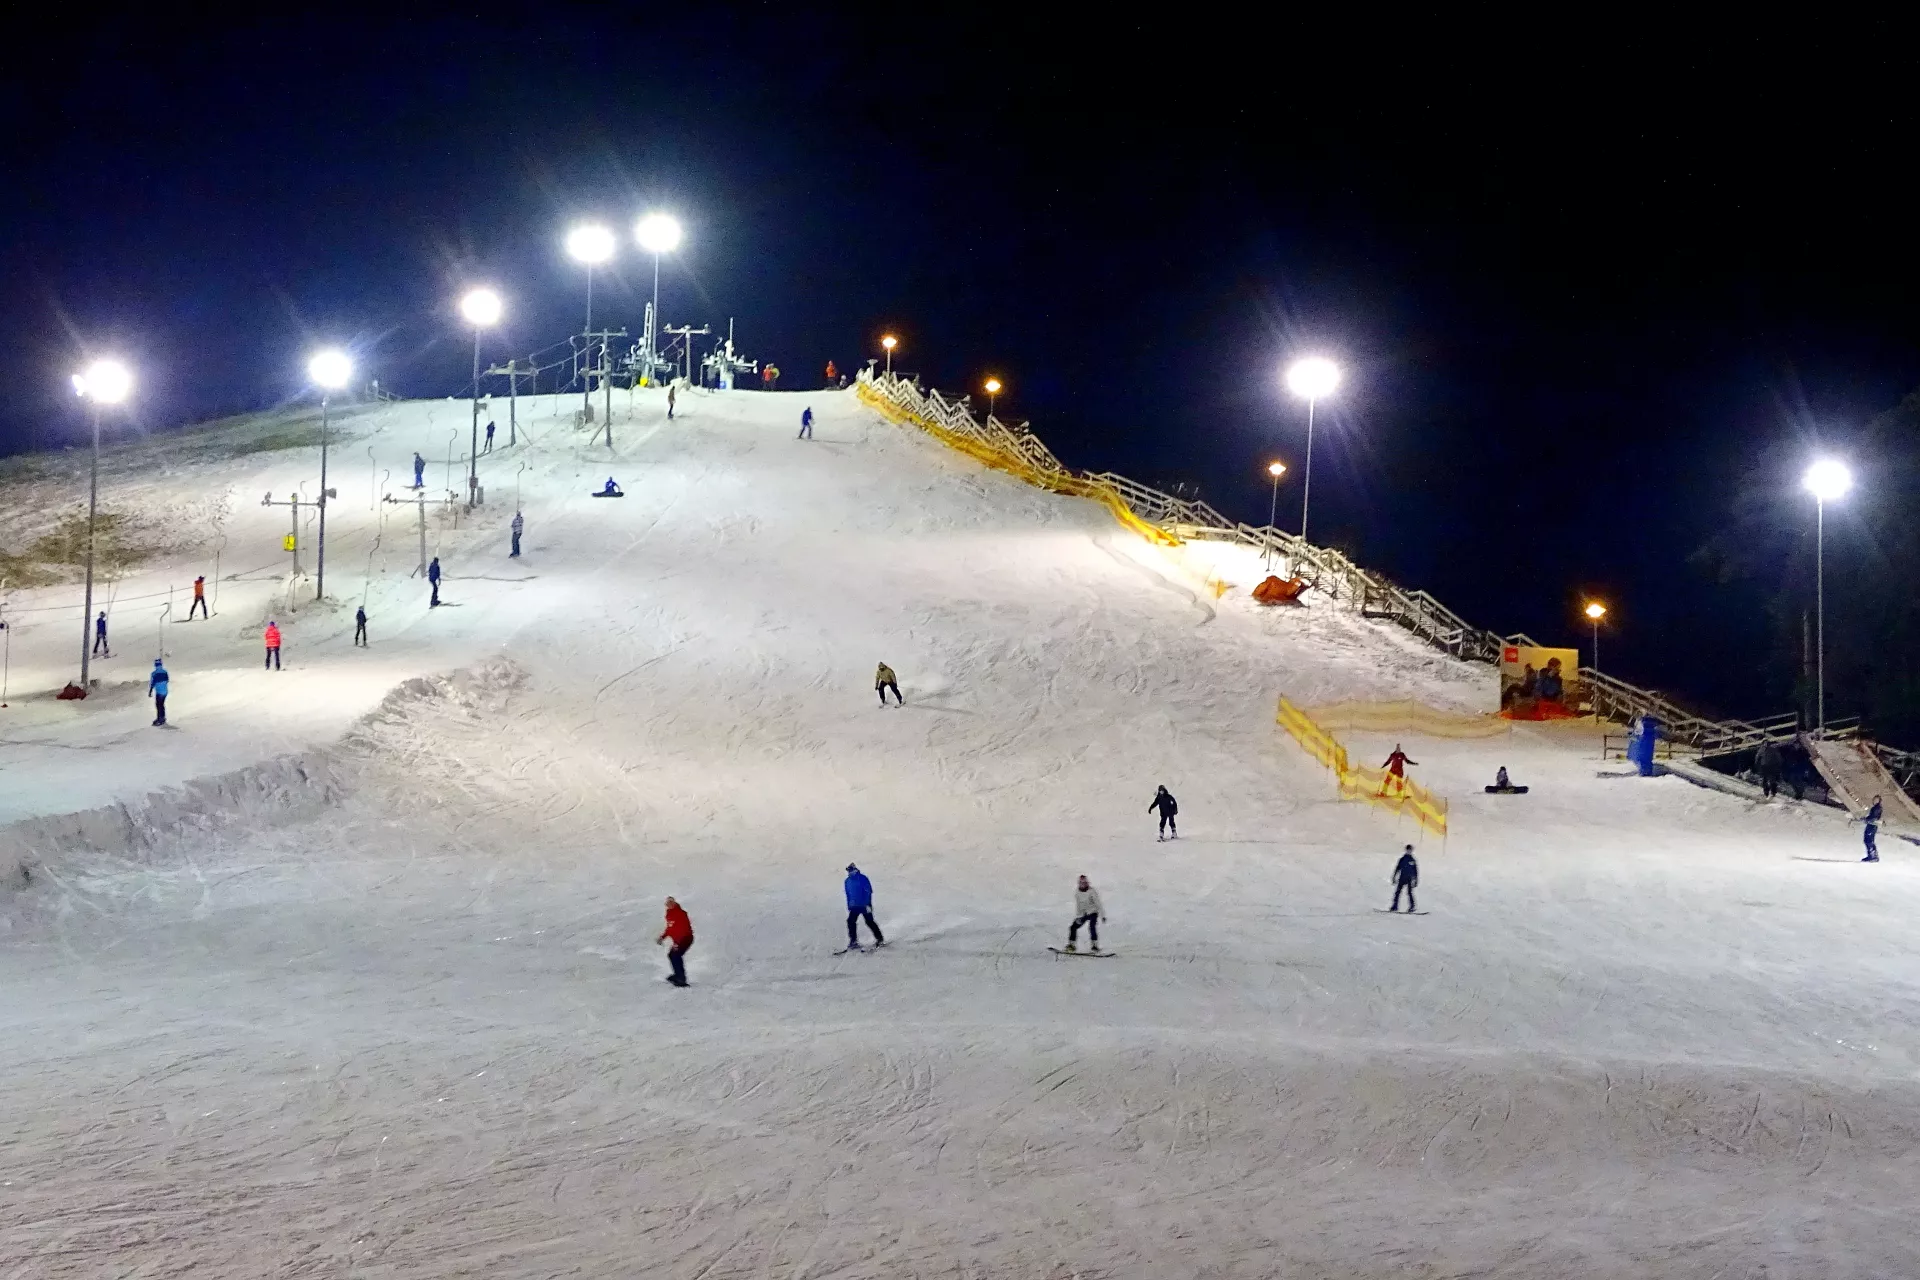 Ski Hill Lemberg's Trilby in Latvia, Europe | Snowboarding,Skiing - Rated 3.9